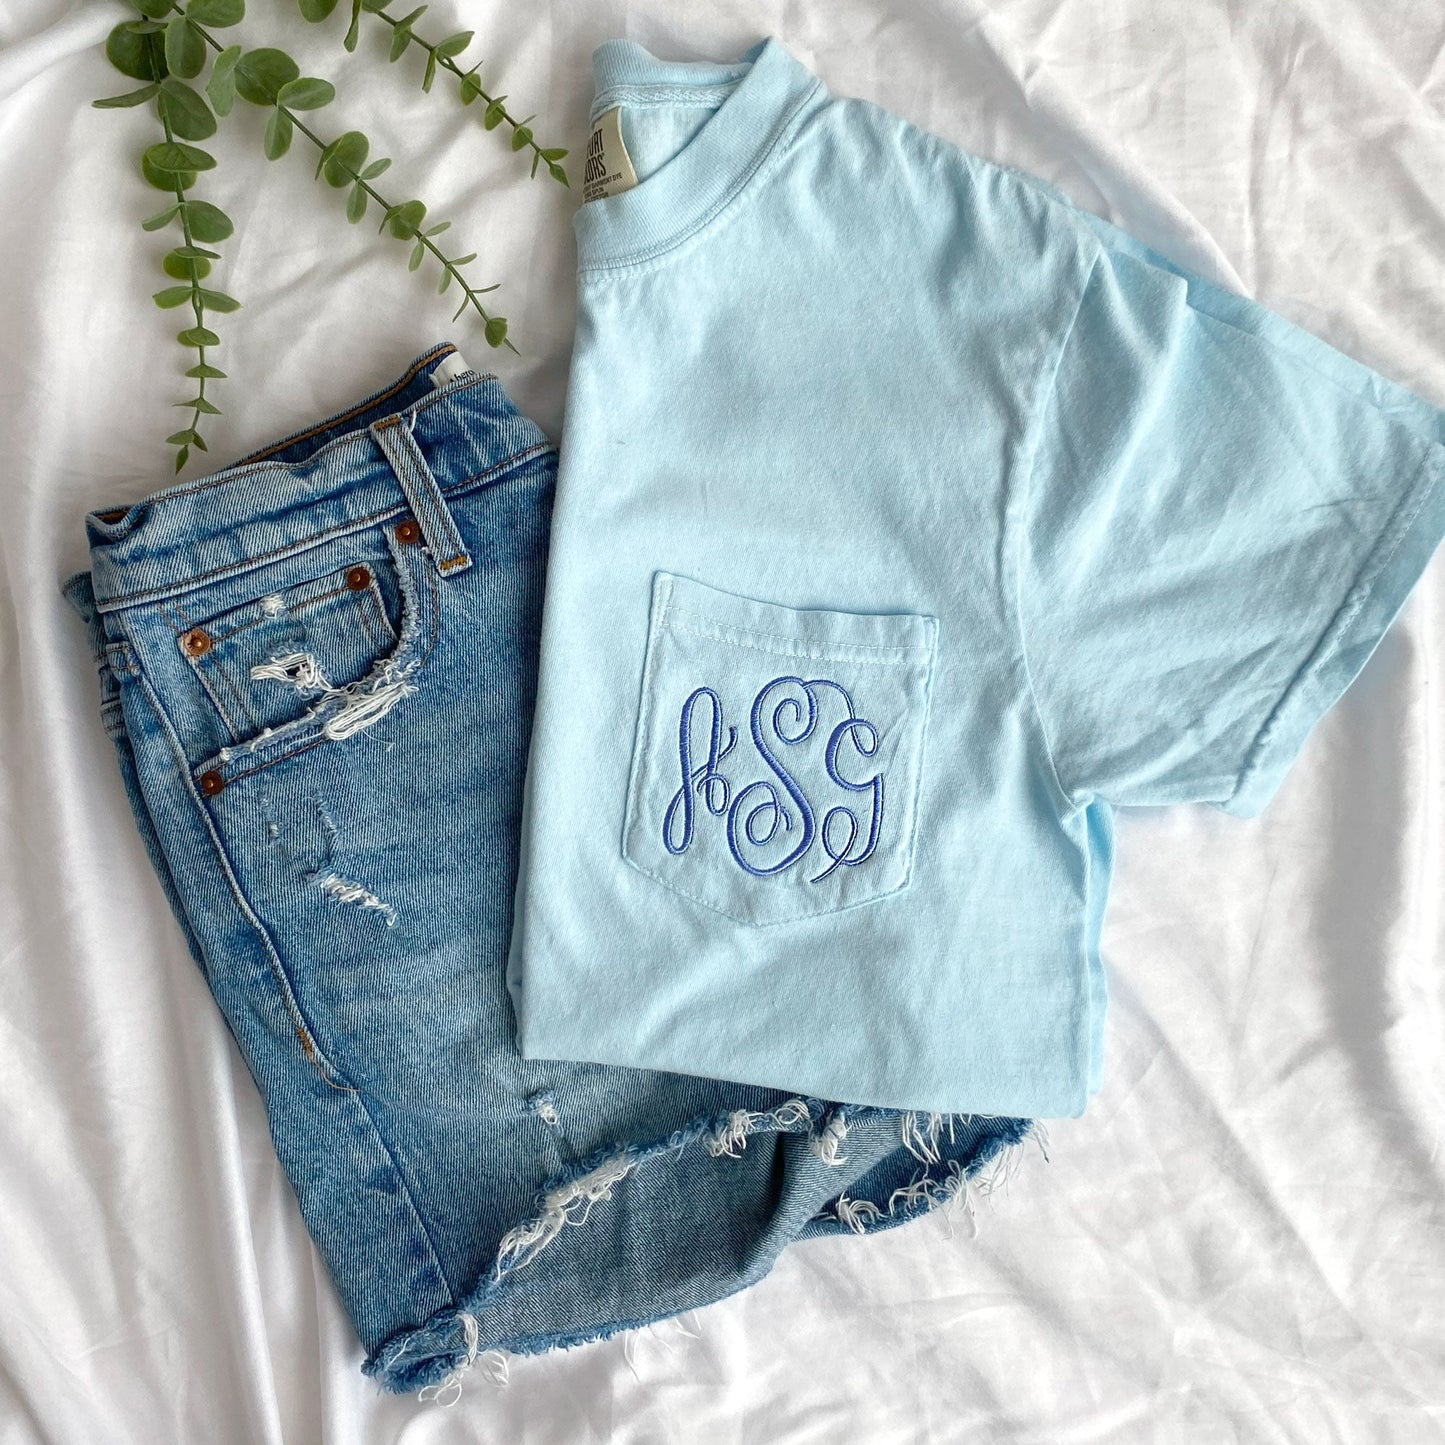 Jeans shorts styled with a chambray comfort colors tee with monogram embroidered on the pocket in periwinkle thread